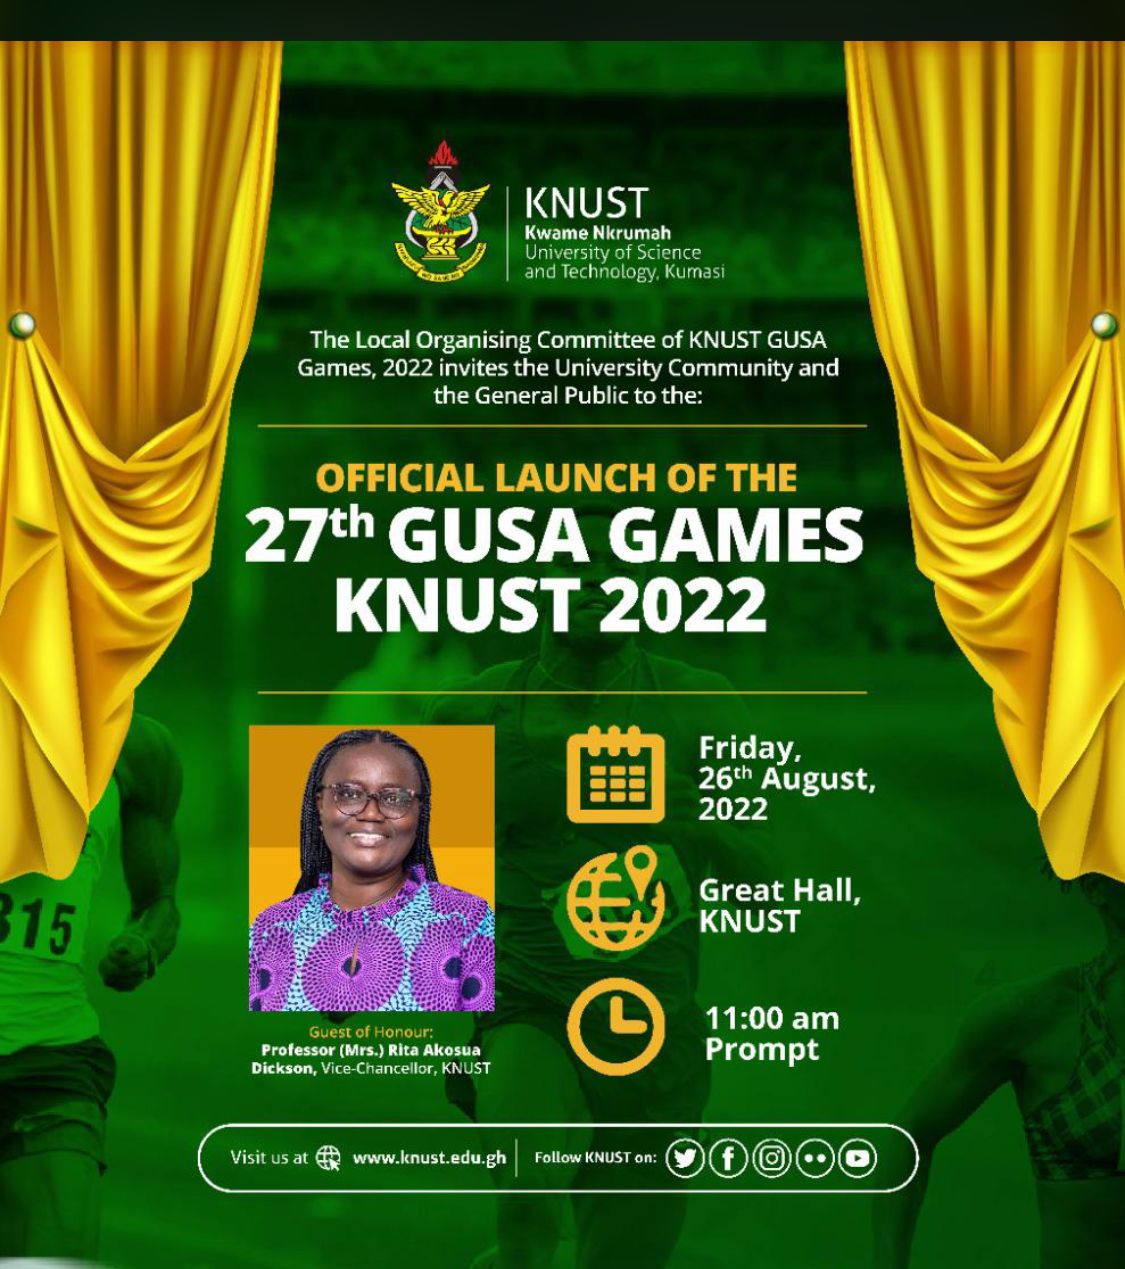 2022 GUSA GAMES TO BE LAUNCH ON 26TH AUGUST, 2022 AT KNUST, KUMASI